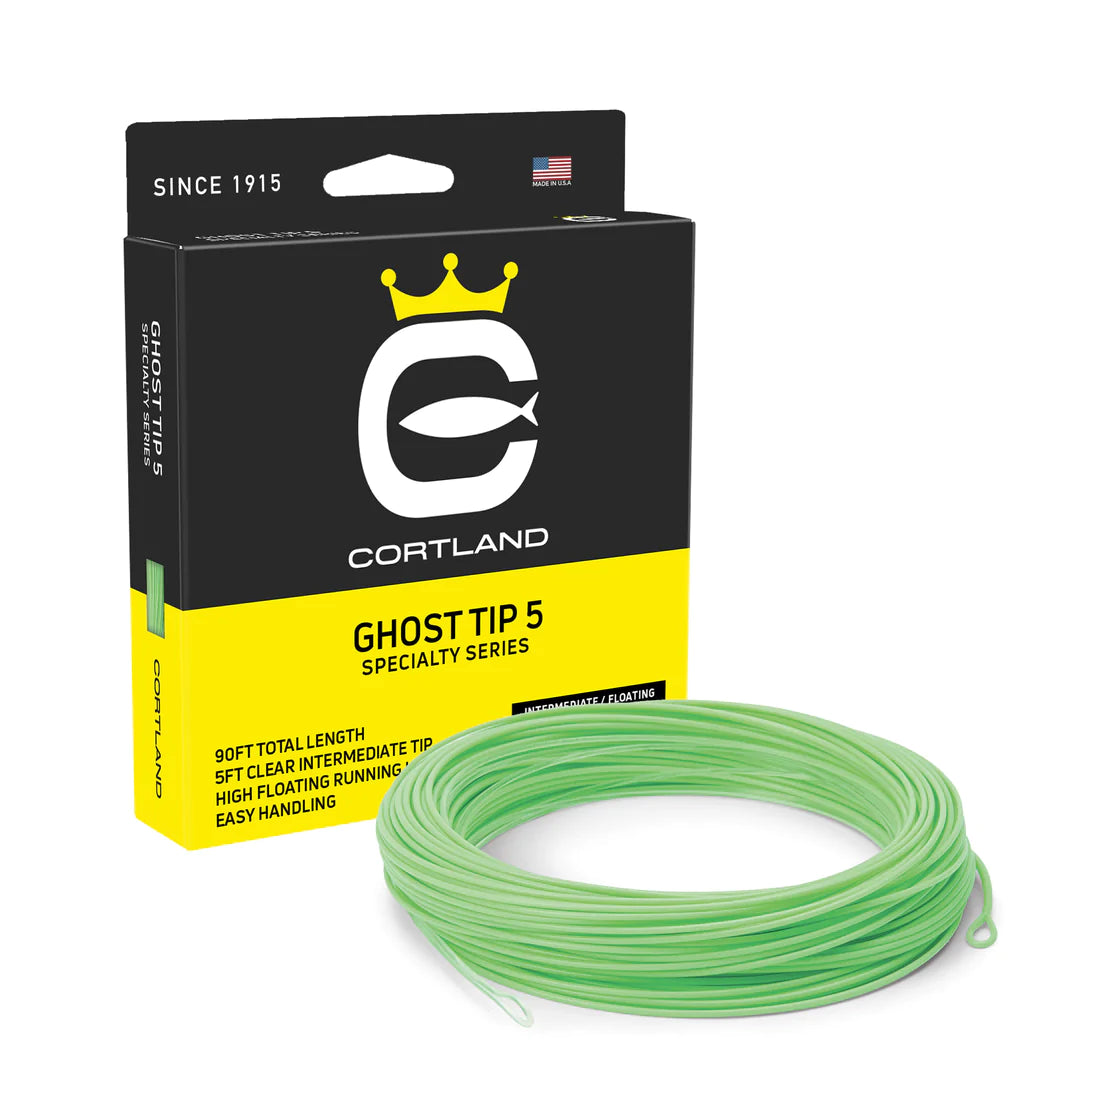 Cortland Specialty Series Ghost Tip 5 Fly Lines